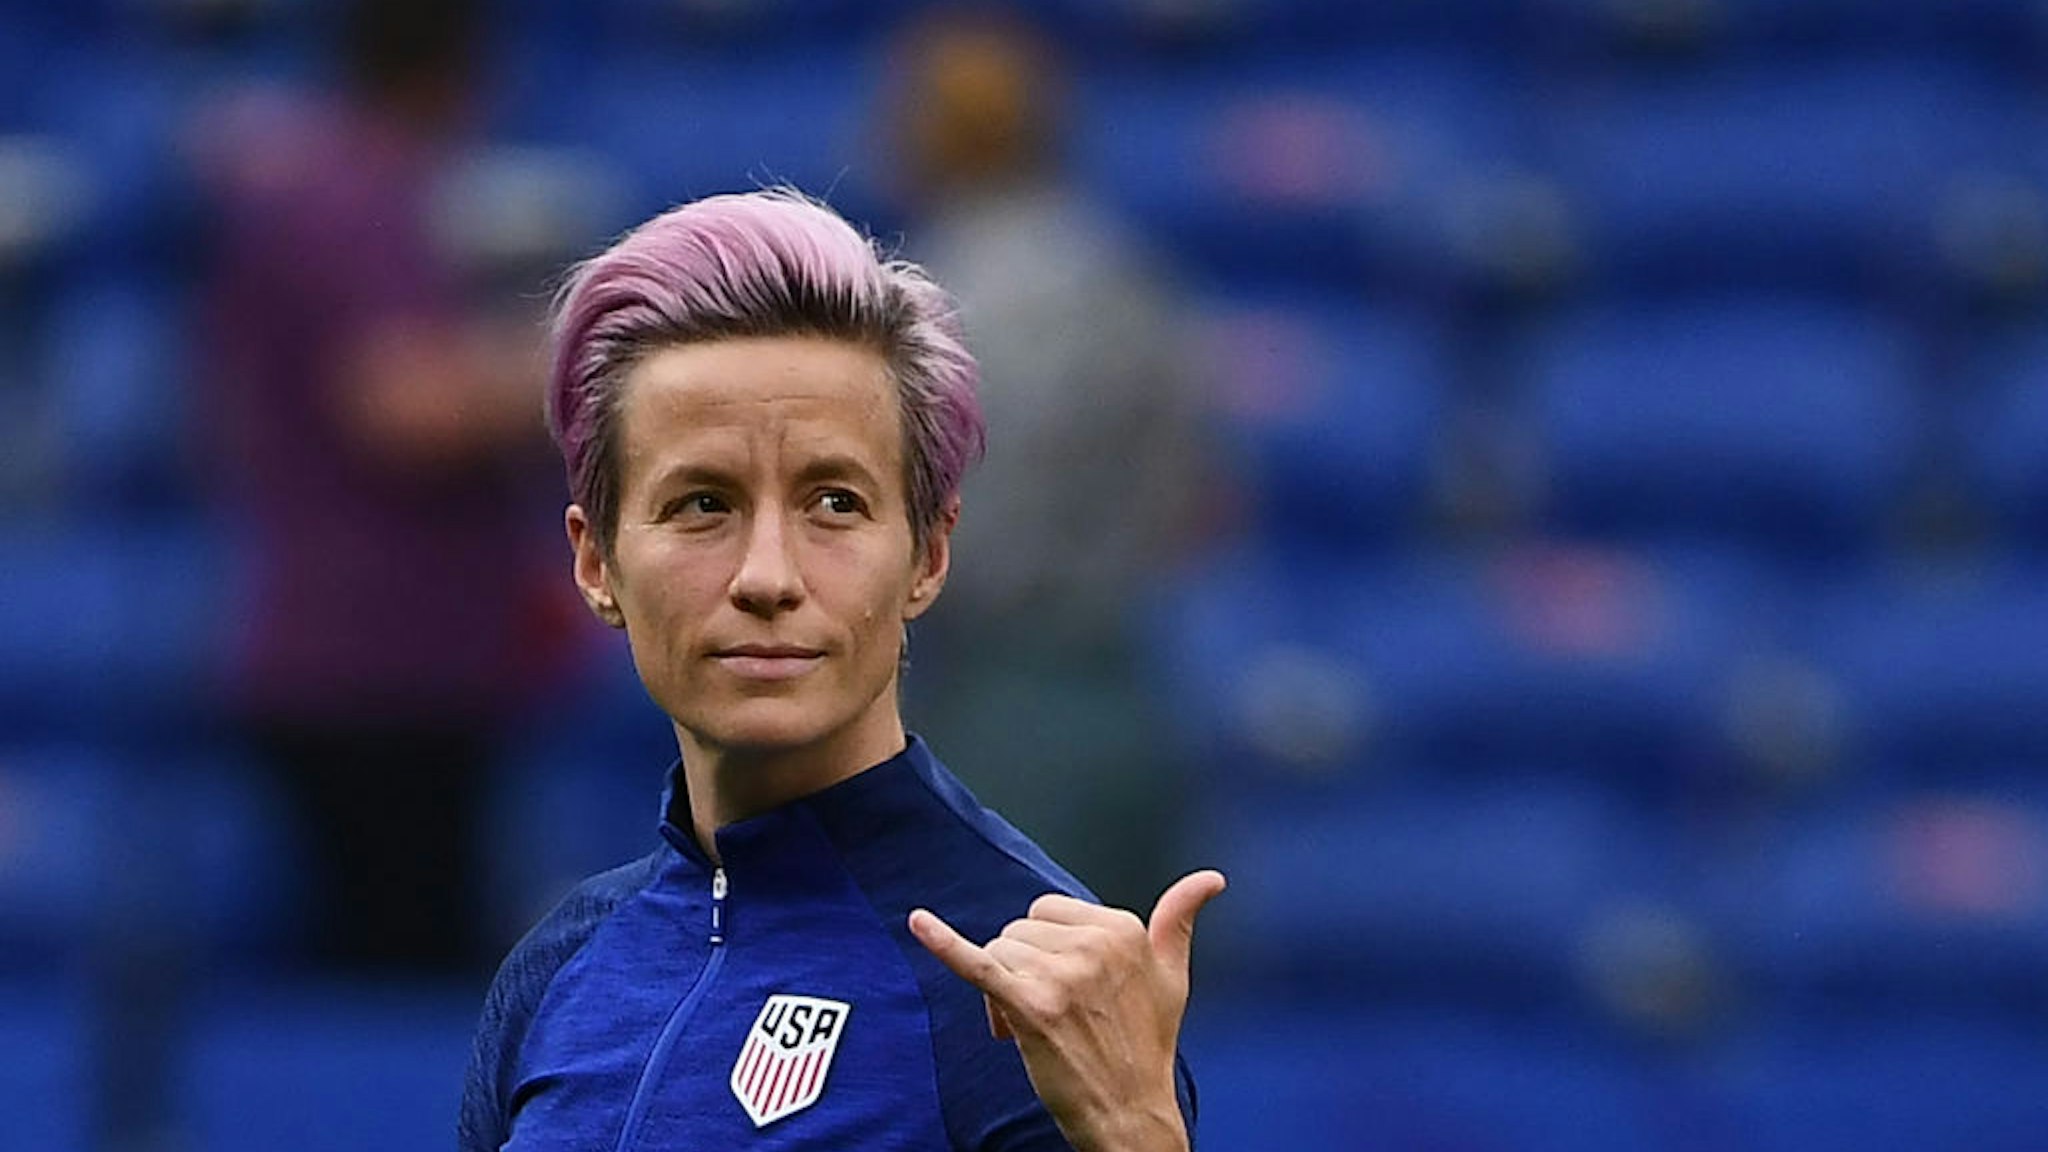 TOPSHOT - United States' forward Megan Rapinoe gestures as she walks around the pitch prior to the France 2019 Women's World Cup semi-final football match between England and USA, on July 2, 2019, at the Lyon Satdium in Decines-Charpieu, central-eastern France. (Photo by FRANCK FIFE / AFP) (Photo credit should read FRANCK FIFE/AFP via Getty Images)